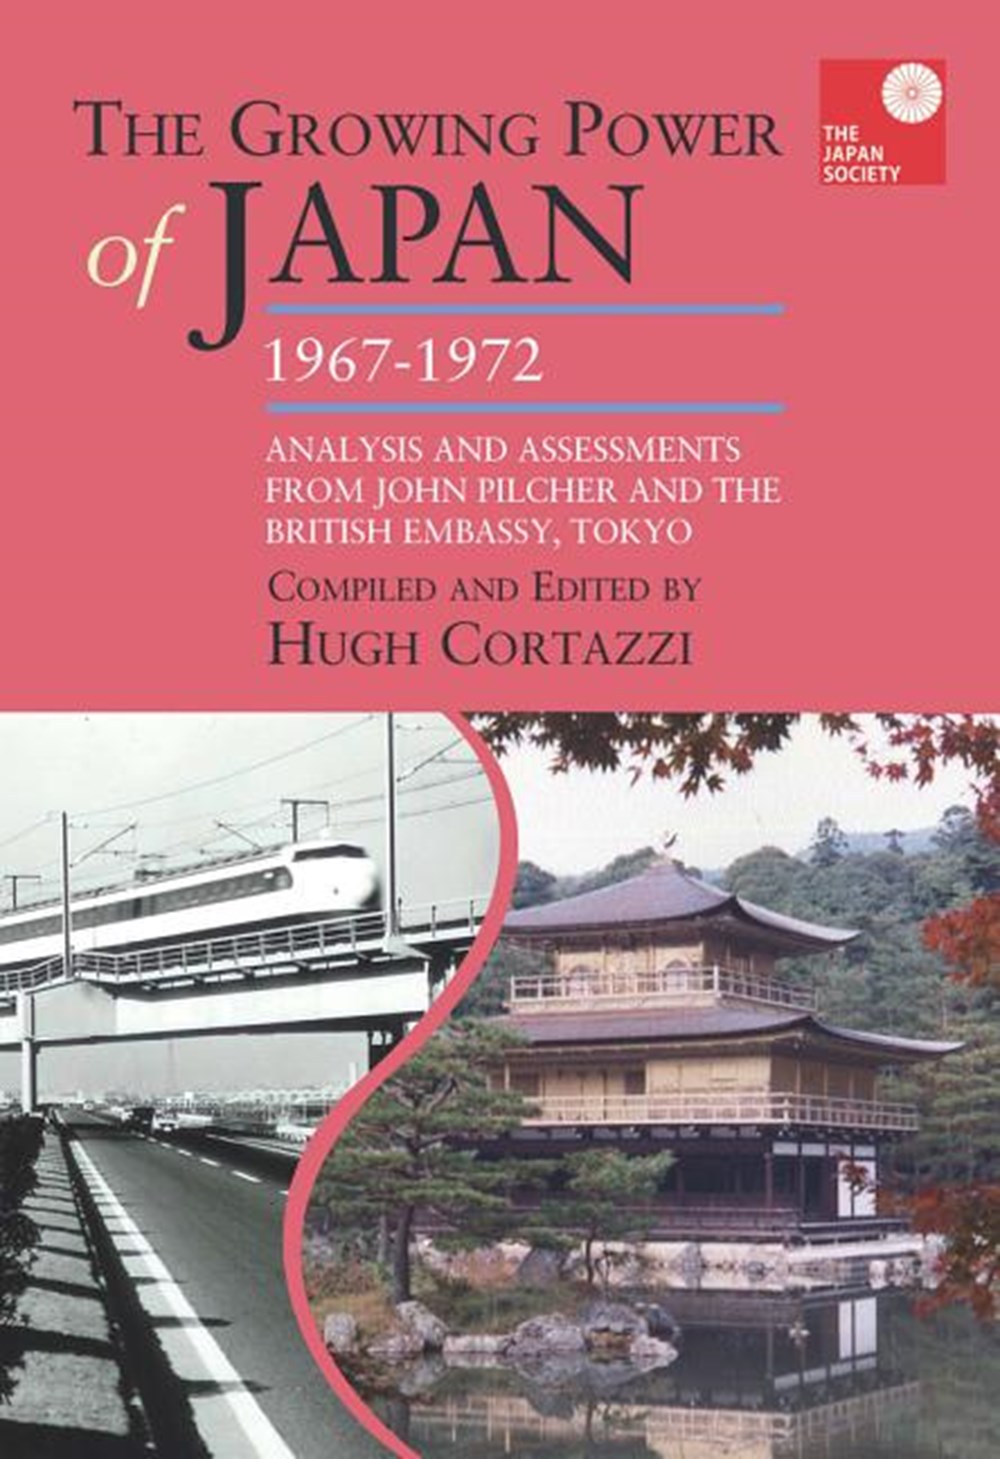 Growing Power of Japan, 1967-1972 Analysis and Assessments from John Pilcher and the British Embassy